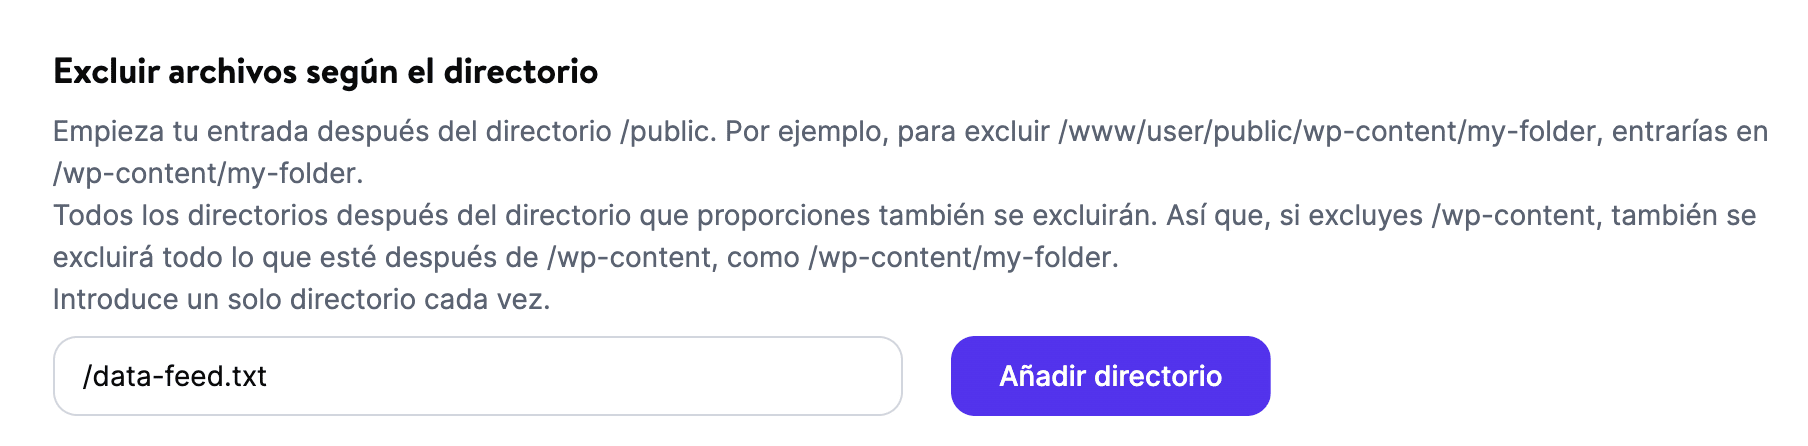 Add /data-feed.txt to Exclude files based on directory in Kinsta CDN settings.